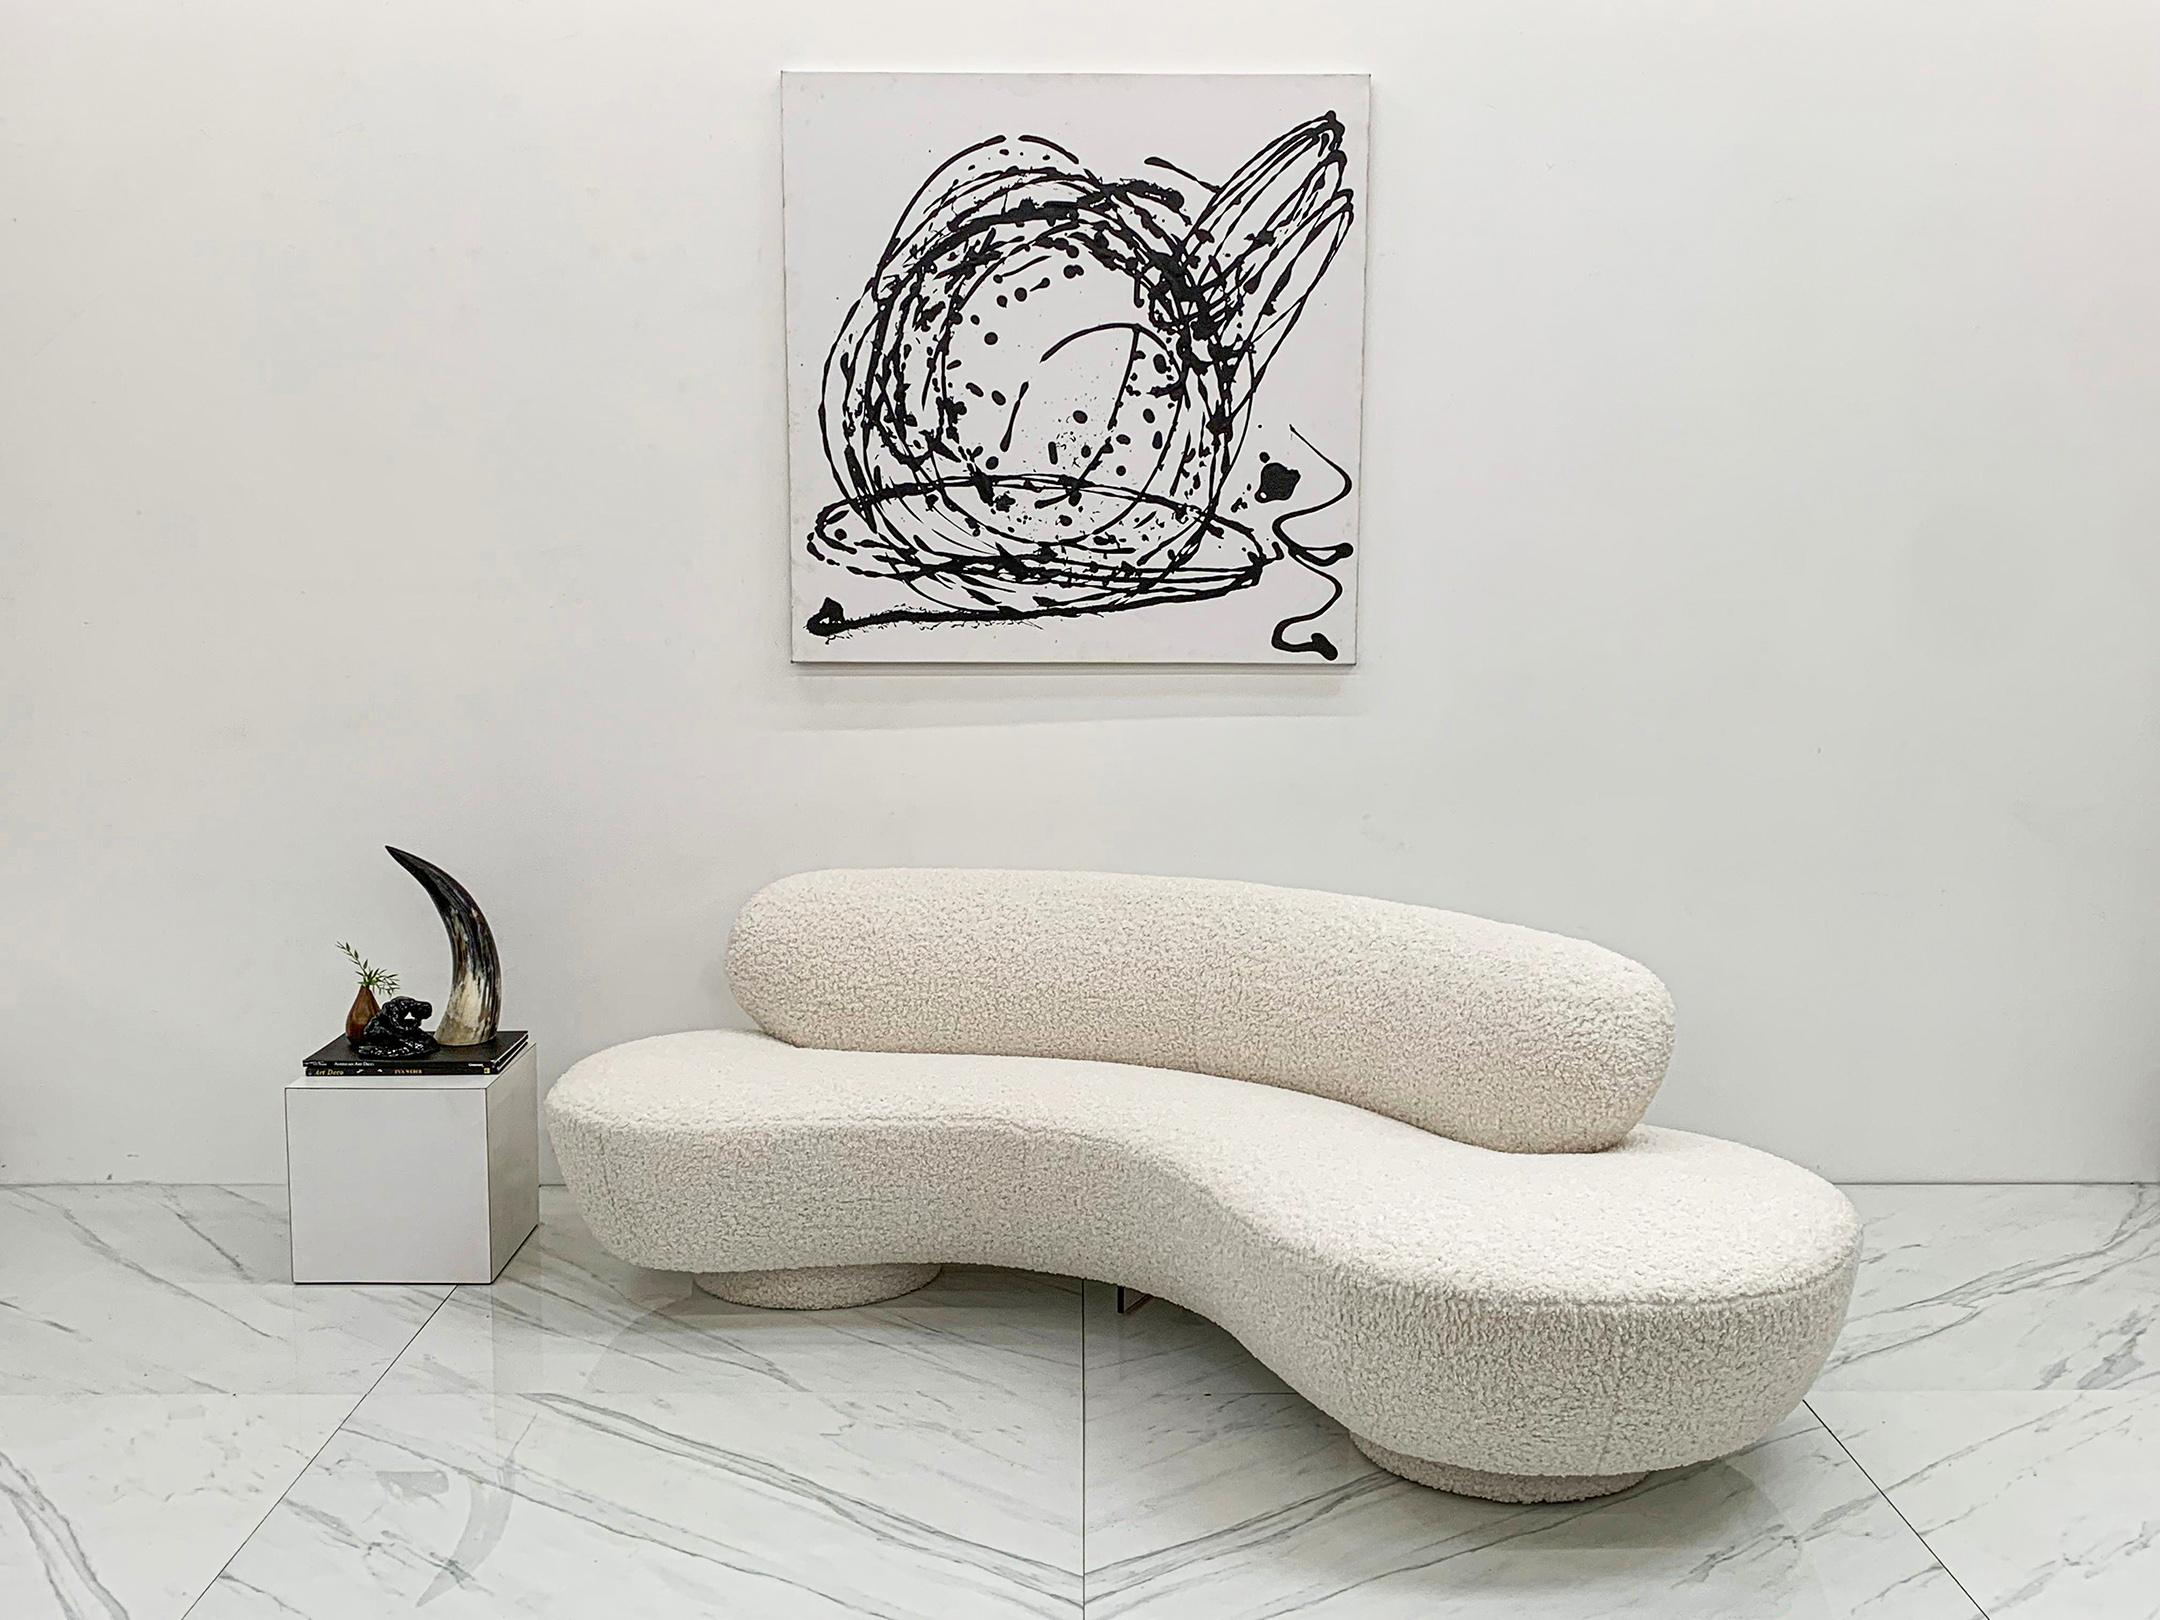 Late 20th Century Vladimir Kagan Serpentine Cloud Sofa for Directional in Heavy Boucle